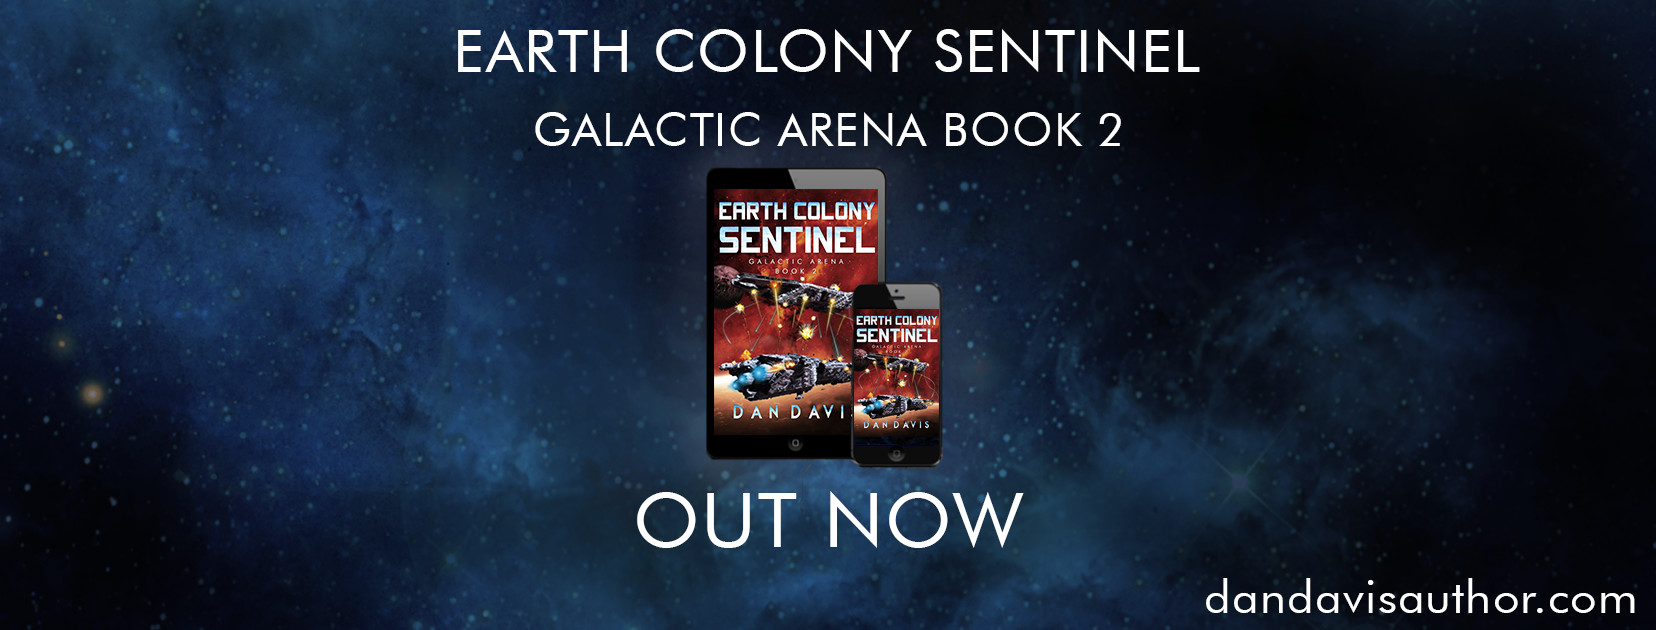 Earth Colony Sentinel (Galactic Arena Book 2) is out now!